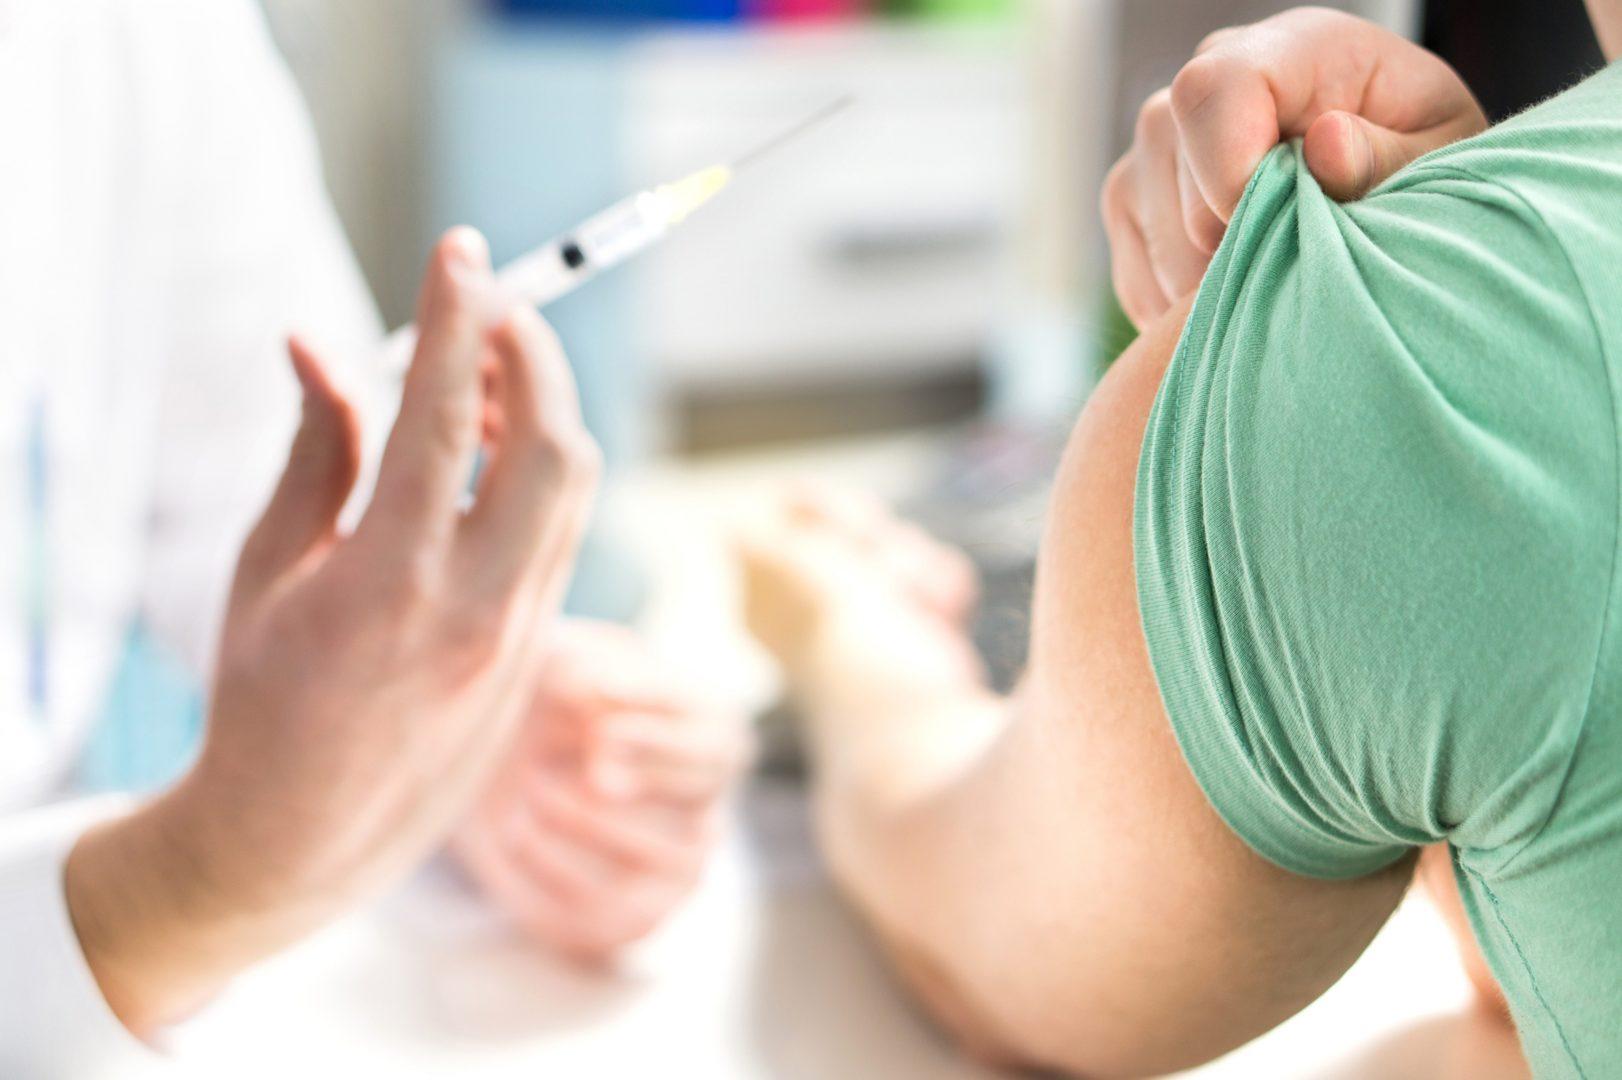 Although many might balk at getting a flu shot, getting it sooner may prevent serious illness, hospitalization or death. (Tero Vesalainen/Dreamstime/Tribune News Service)